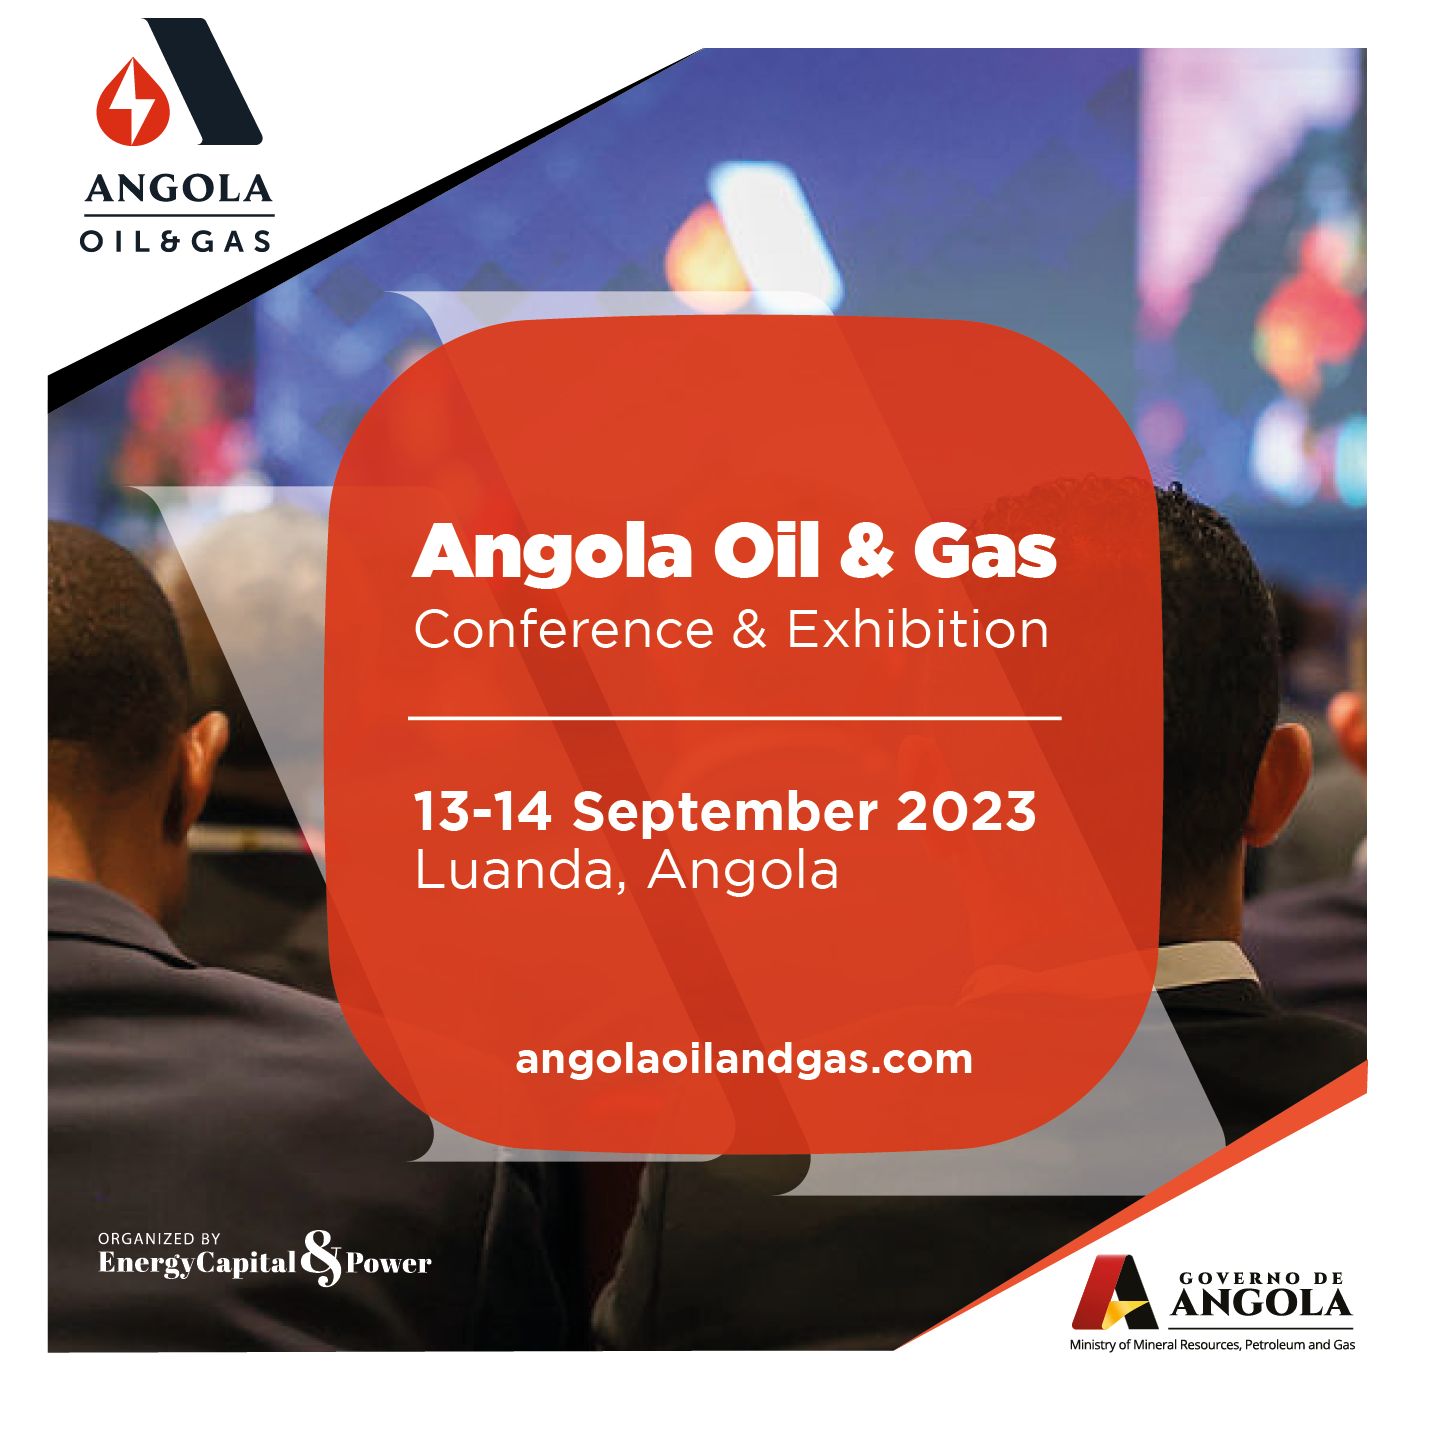 Angola Oil & Gas (AOG) Conference & Exhibition 